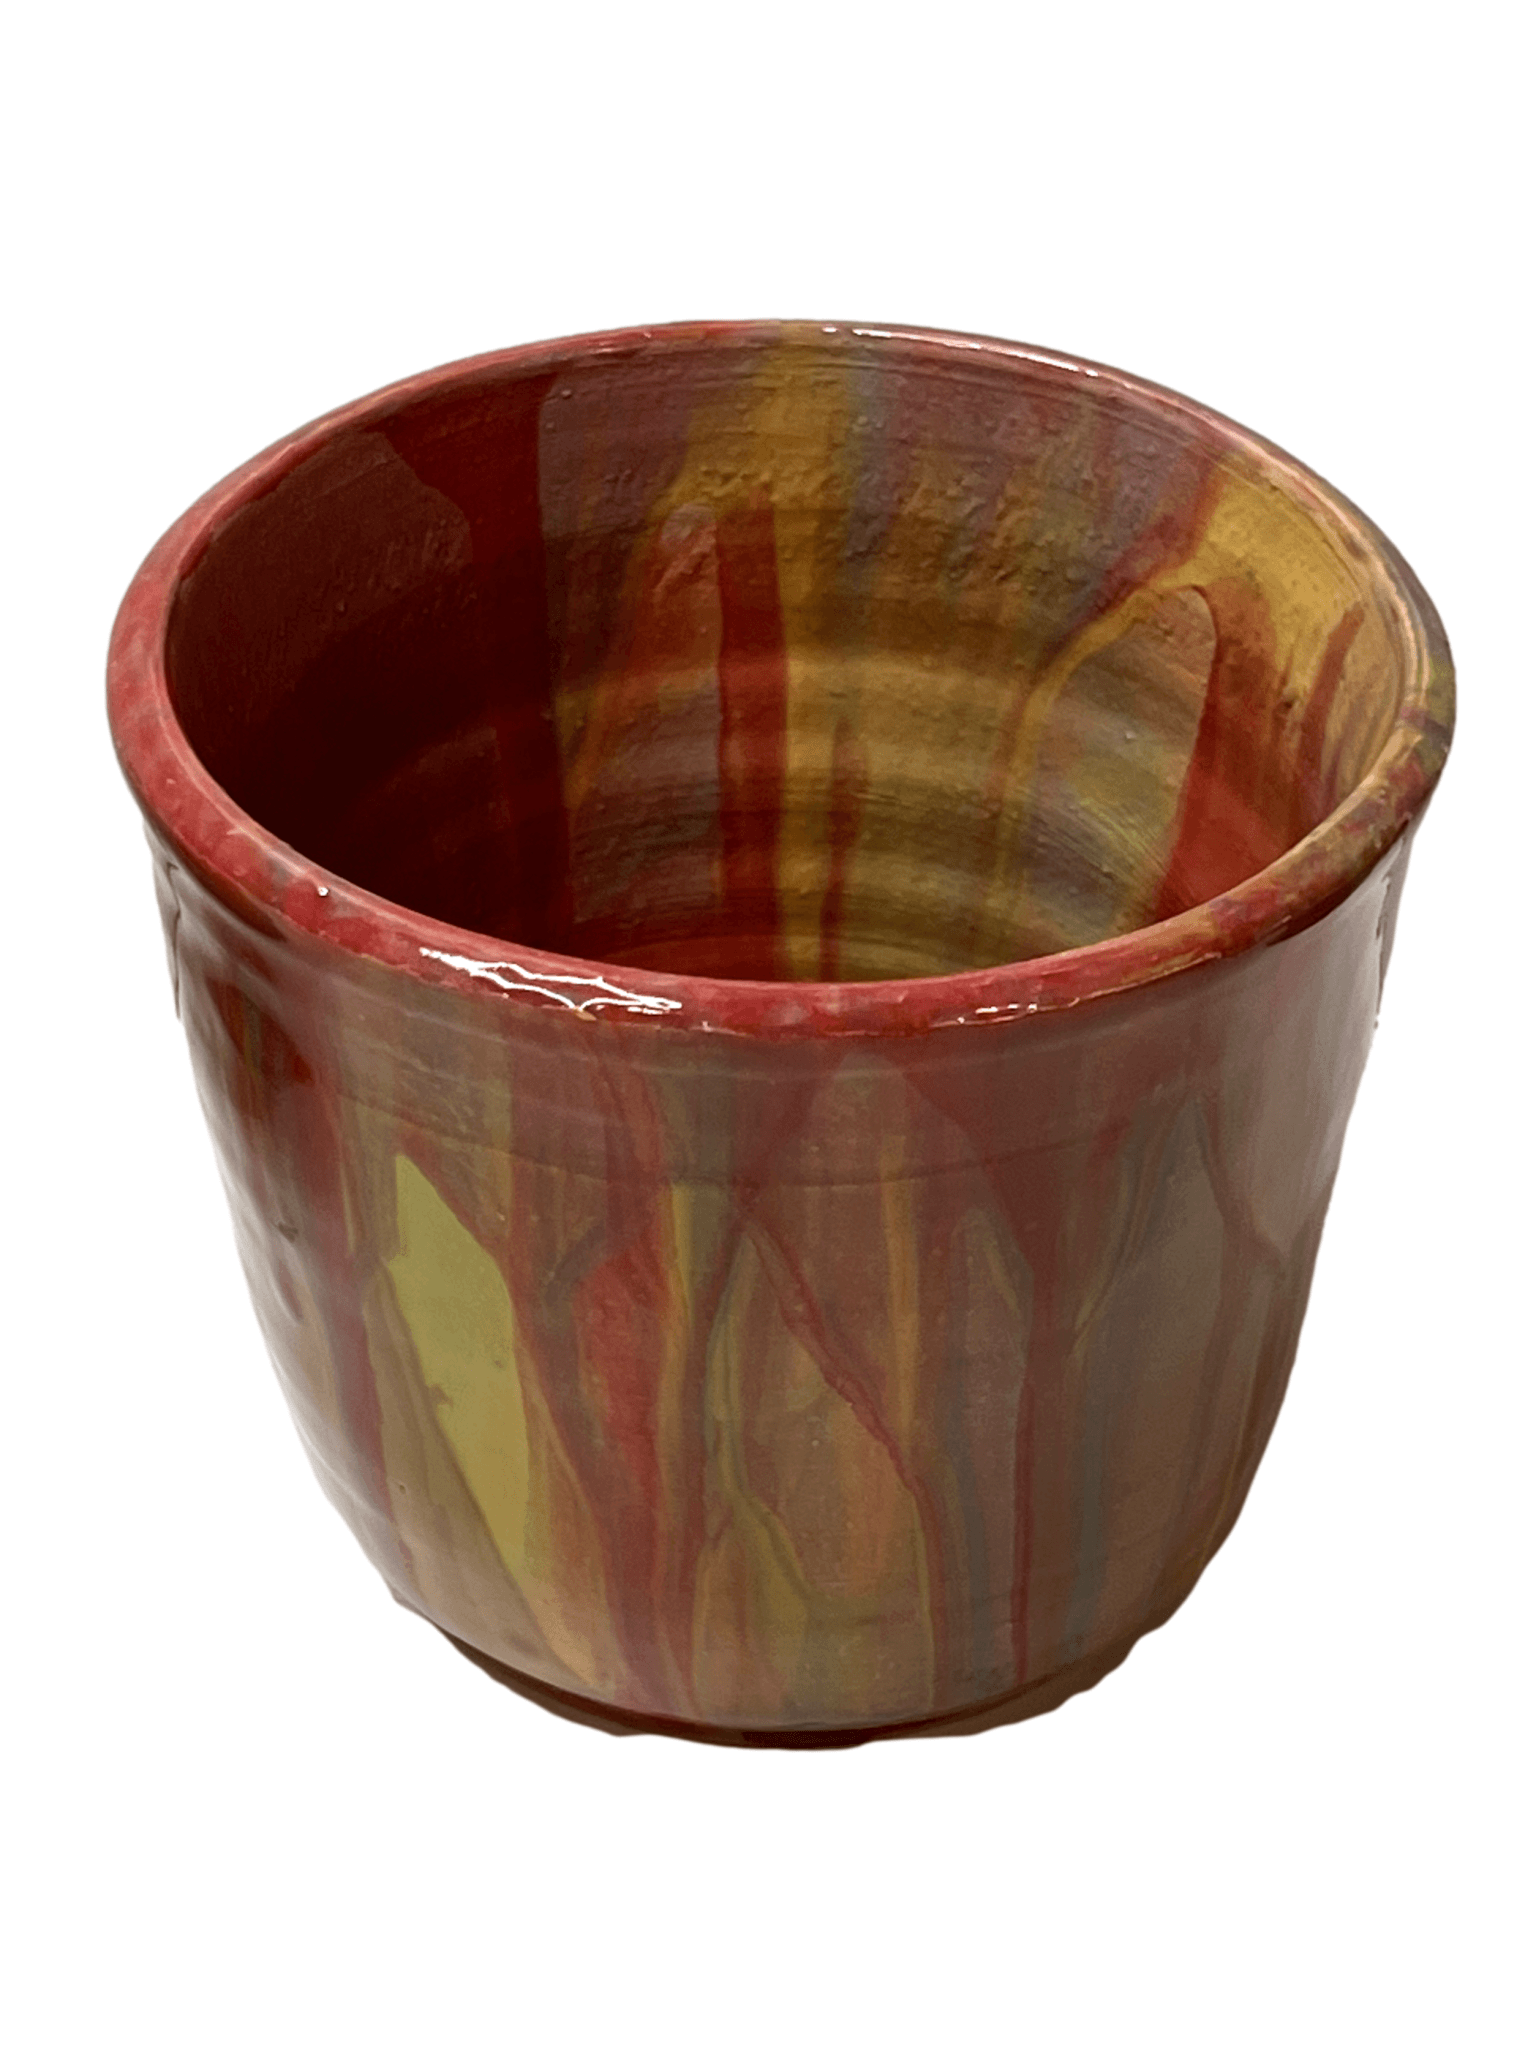 Pottery Planter Pot Wheel Thrown Clay Creatively Glazed Handcrafted By New Mexico Artist H: 4 inches X W: 4 inches X D: 3.5 inches - Ysleta Mission Gift Shop- VOTED El Paso's Best Gift Shop